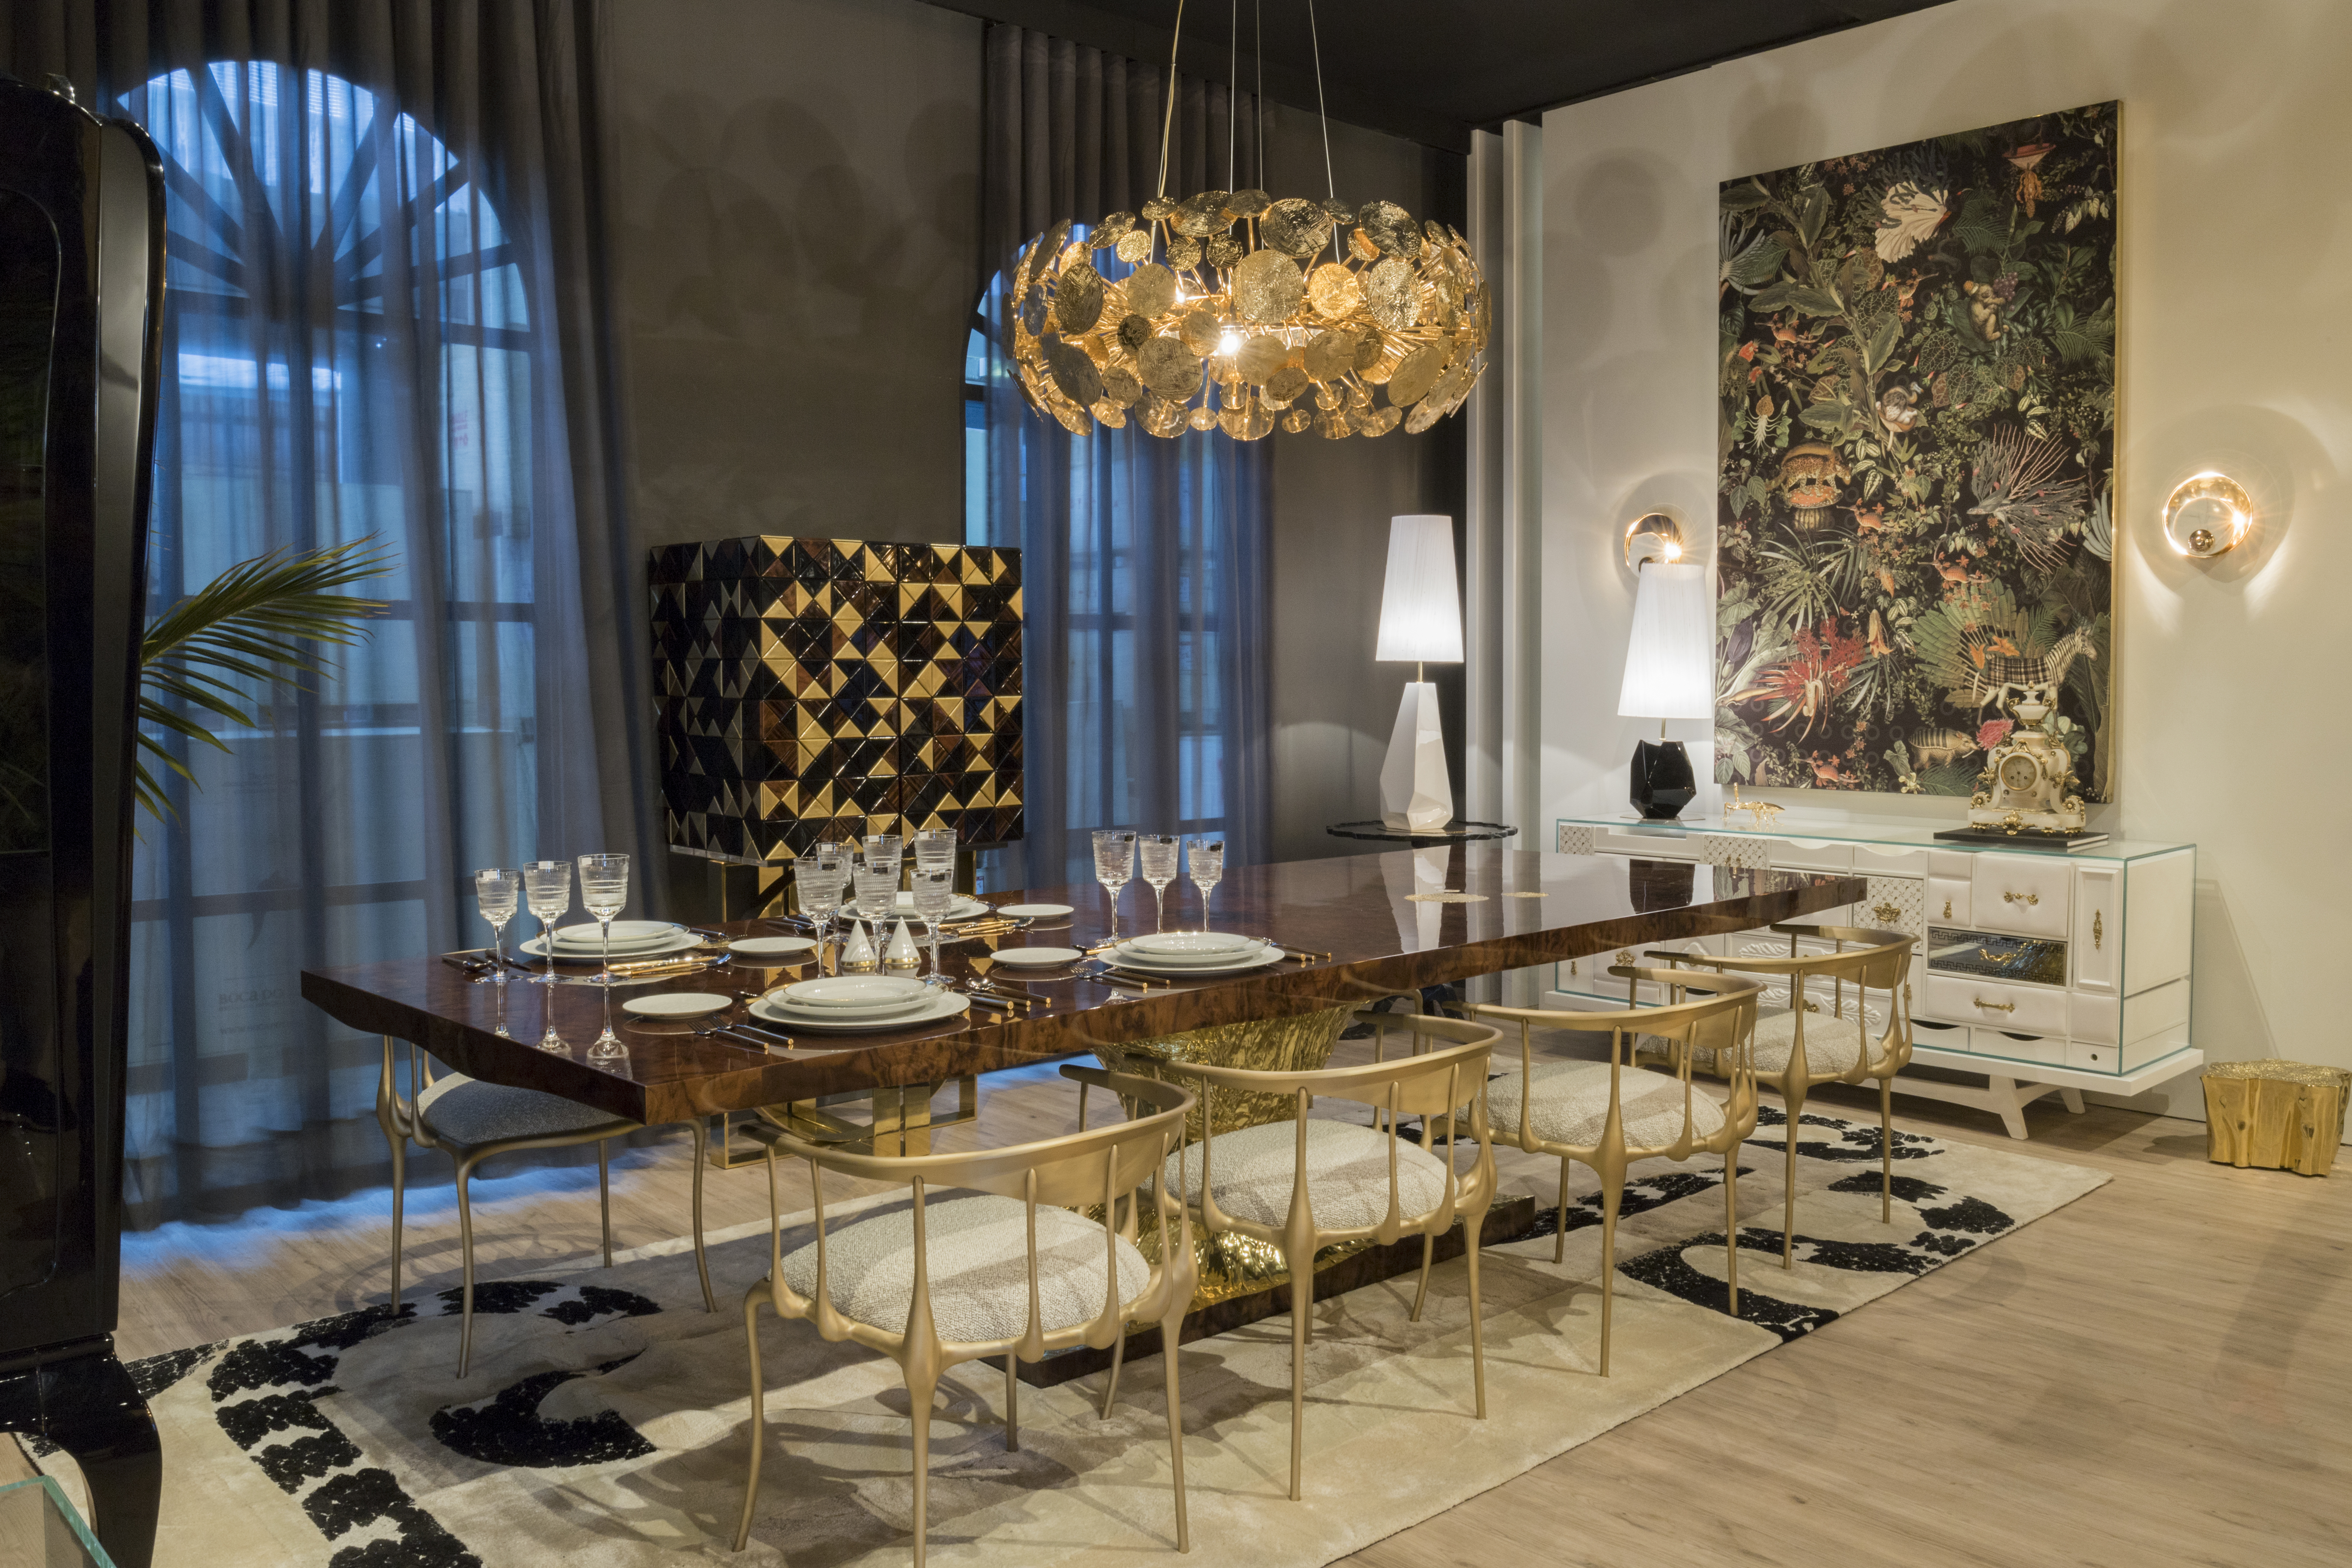 Maison et Objet: Take a Look To The Best Rugs